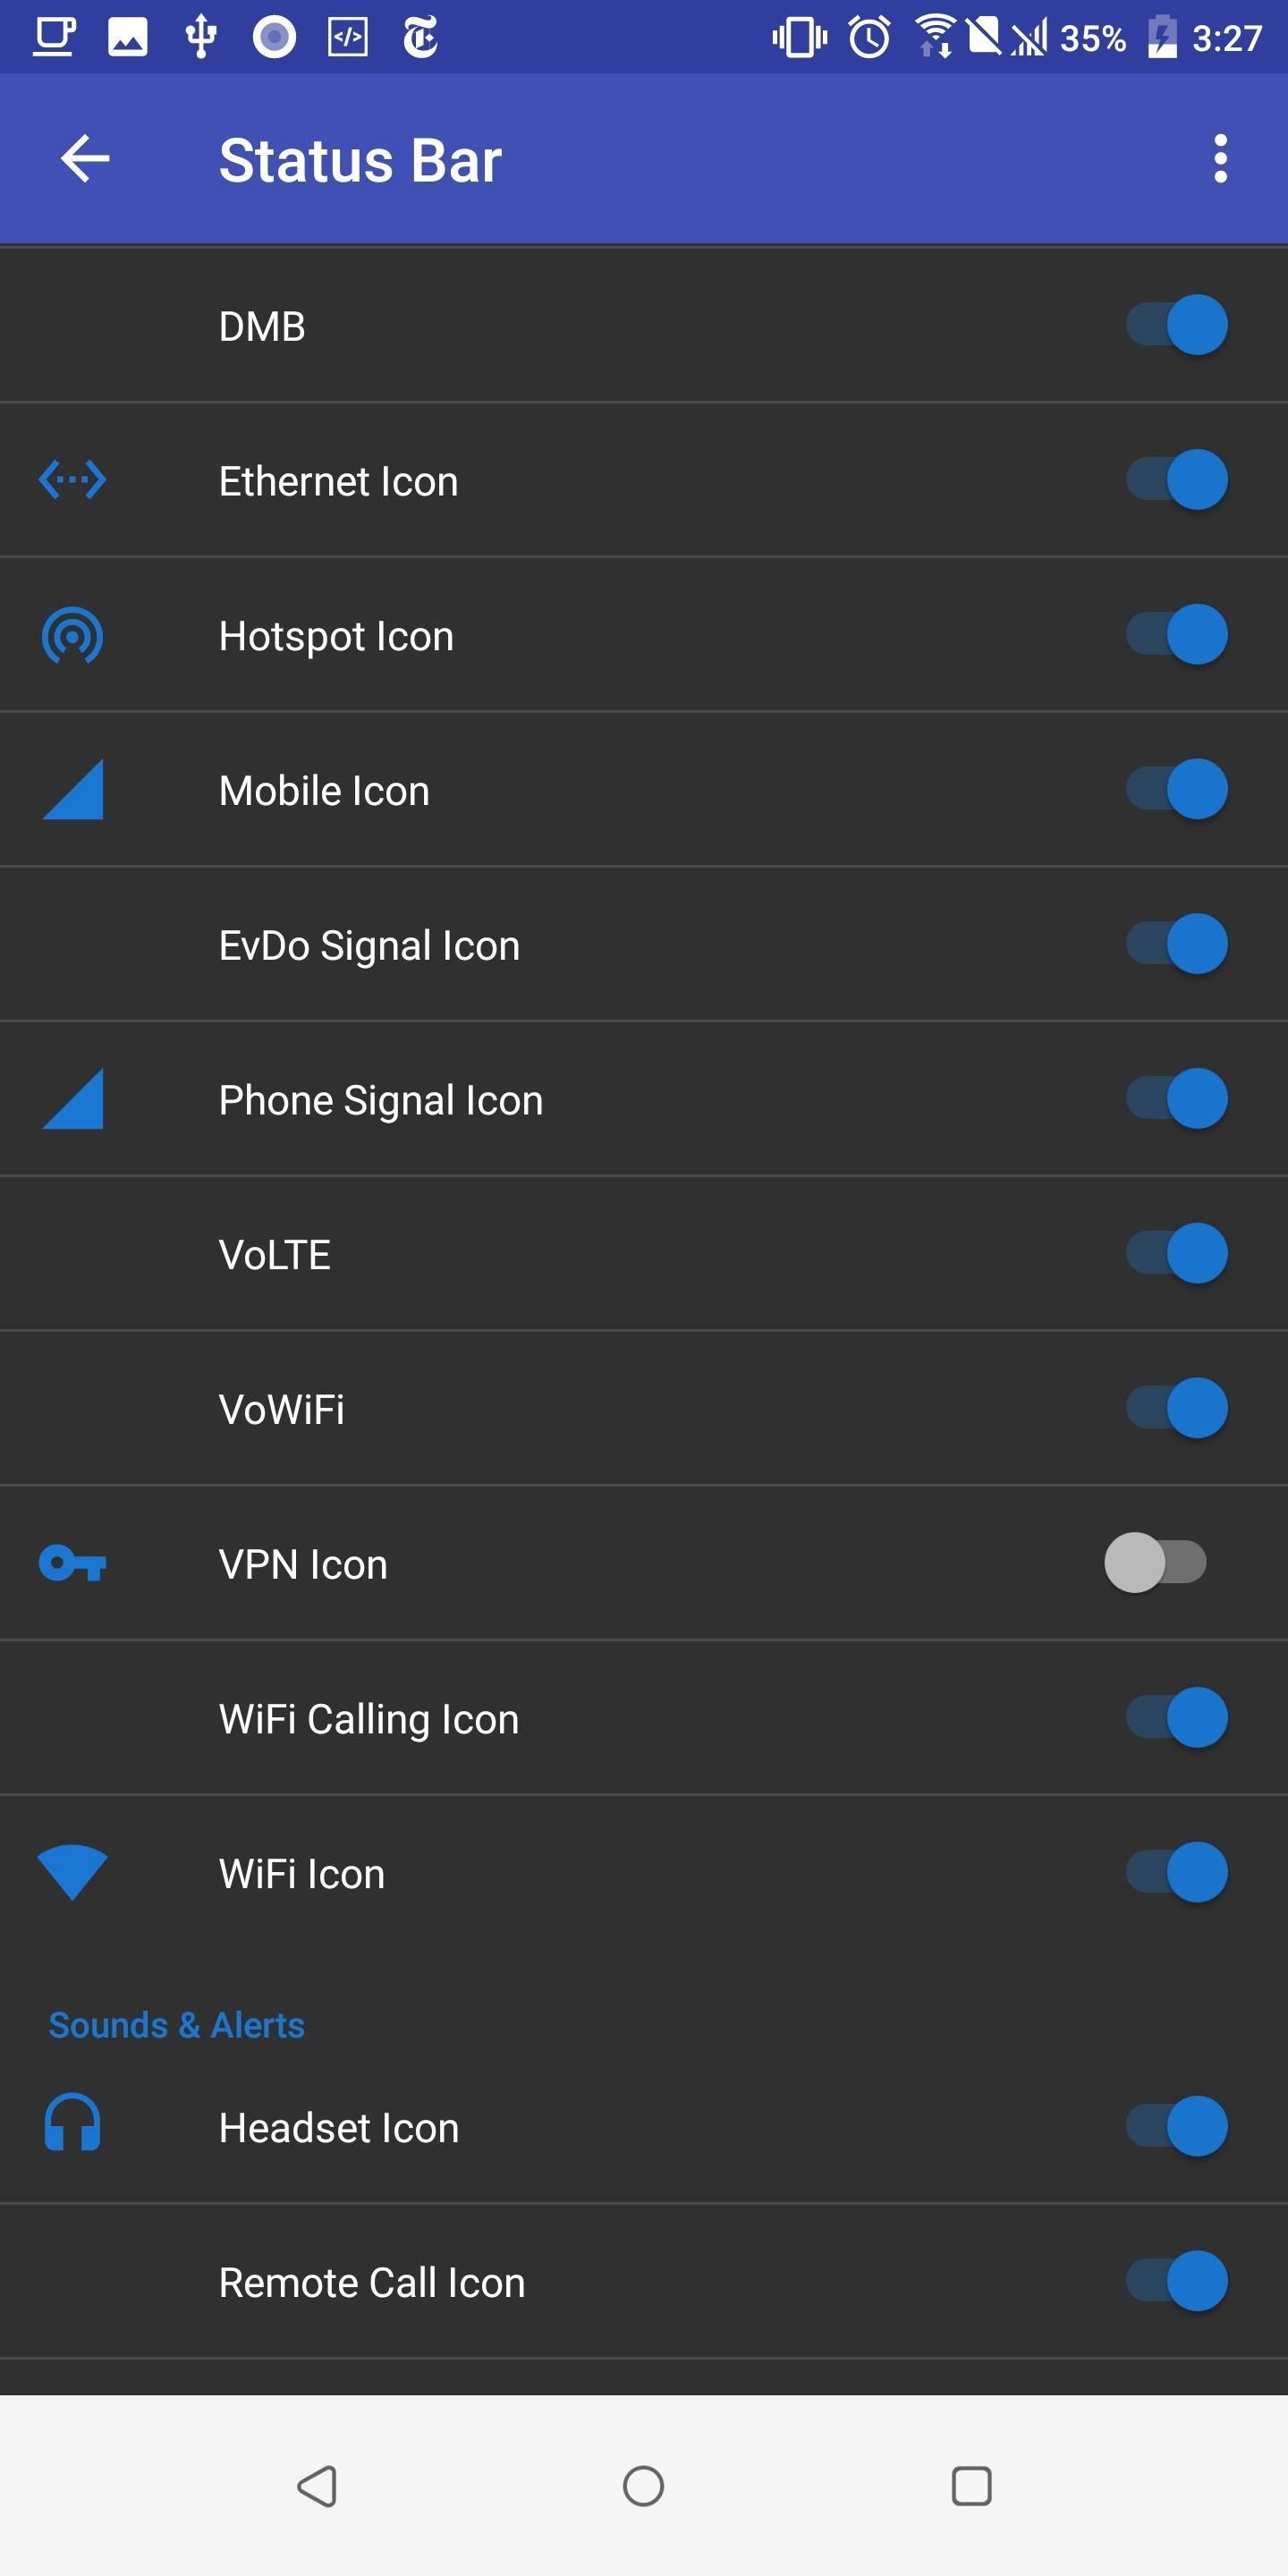  How to hide the VPN icon in the status bar of Android - no root required 